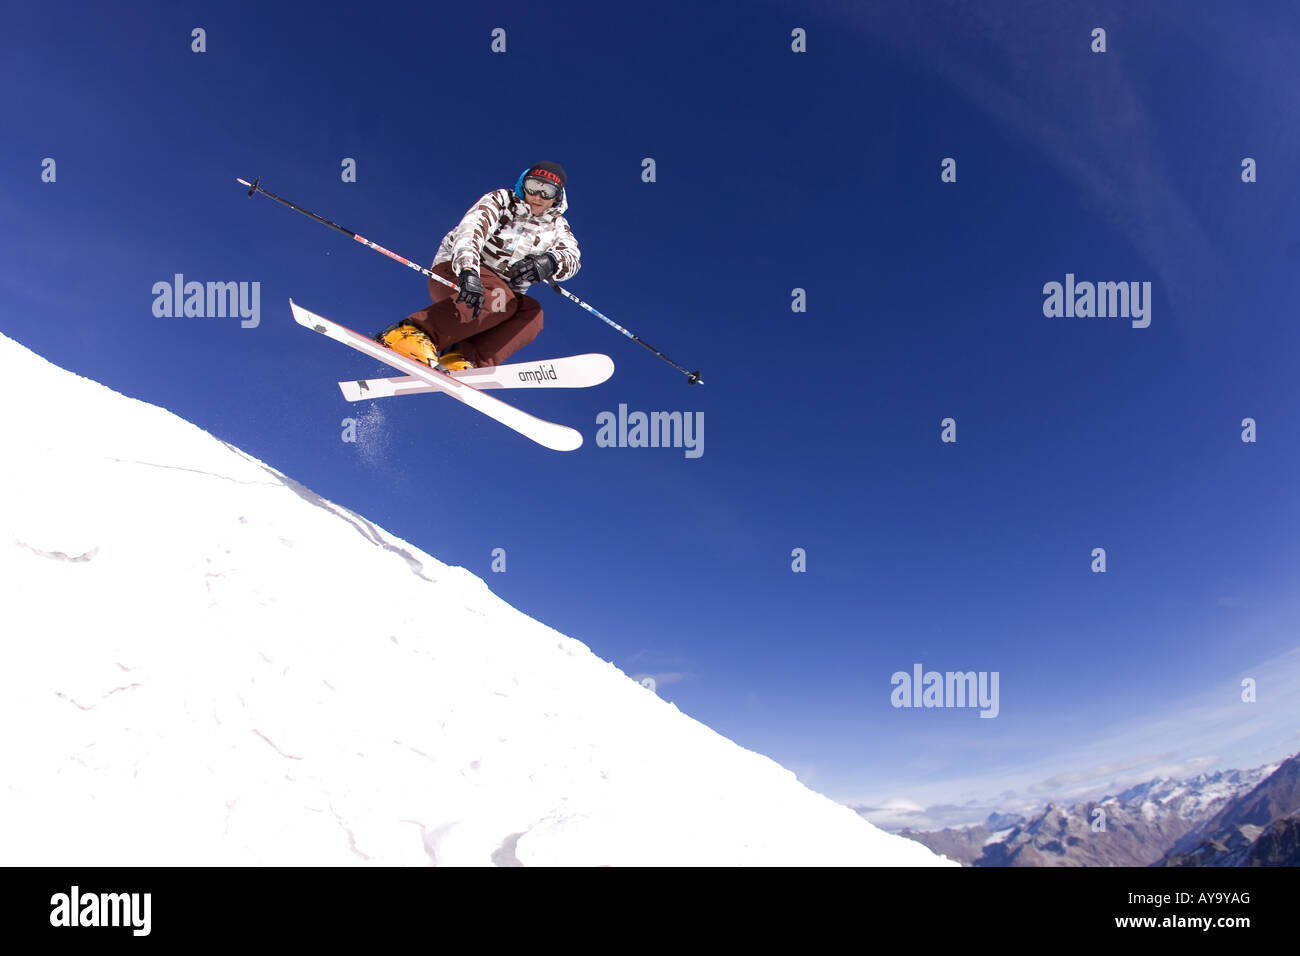 Skier in mid air, free jump, Tignes, France Stock Photo